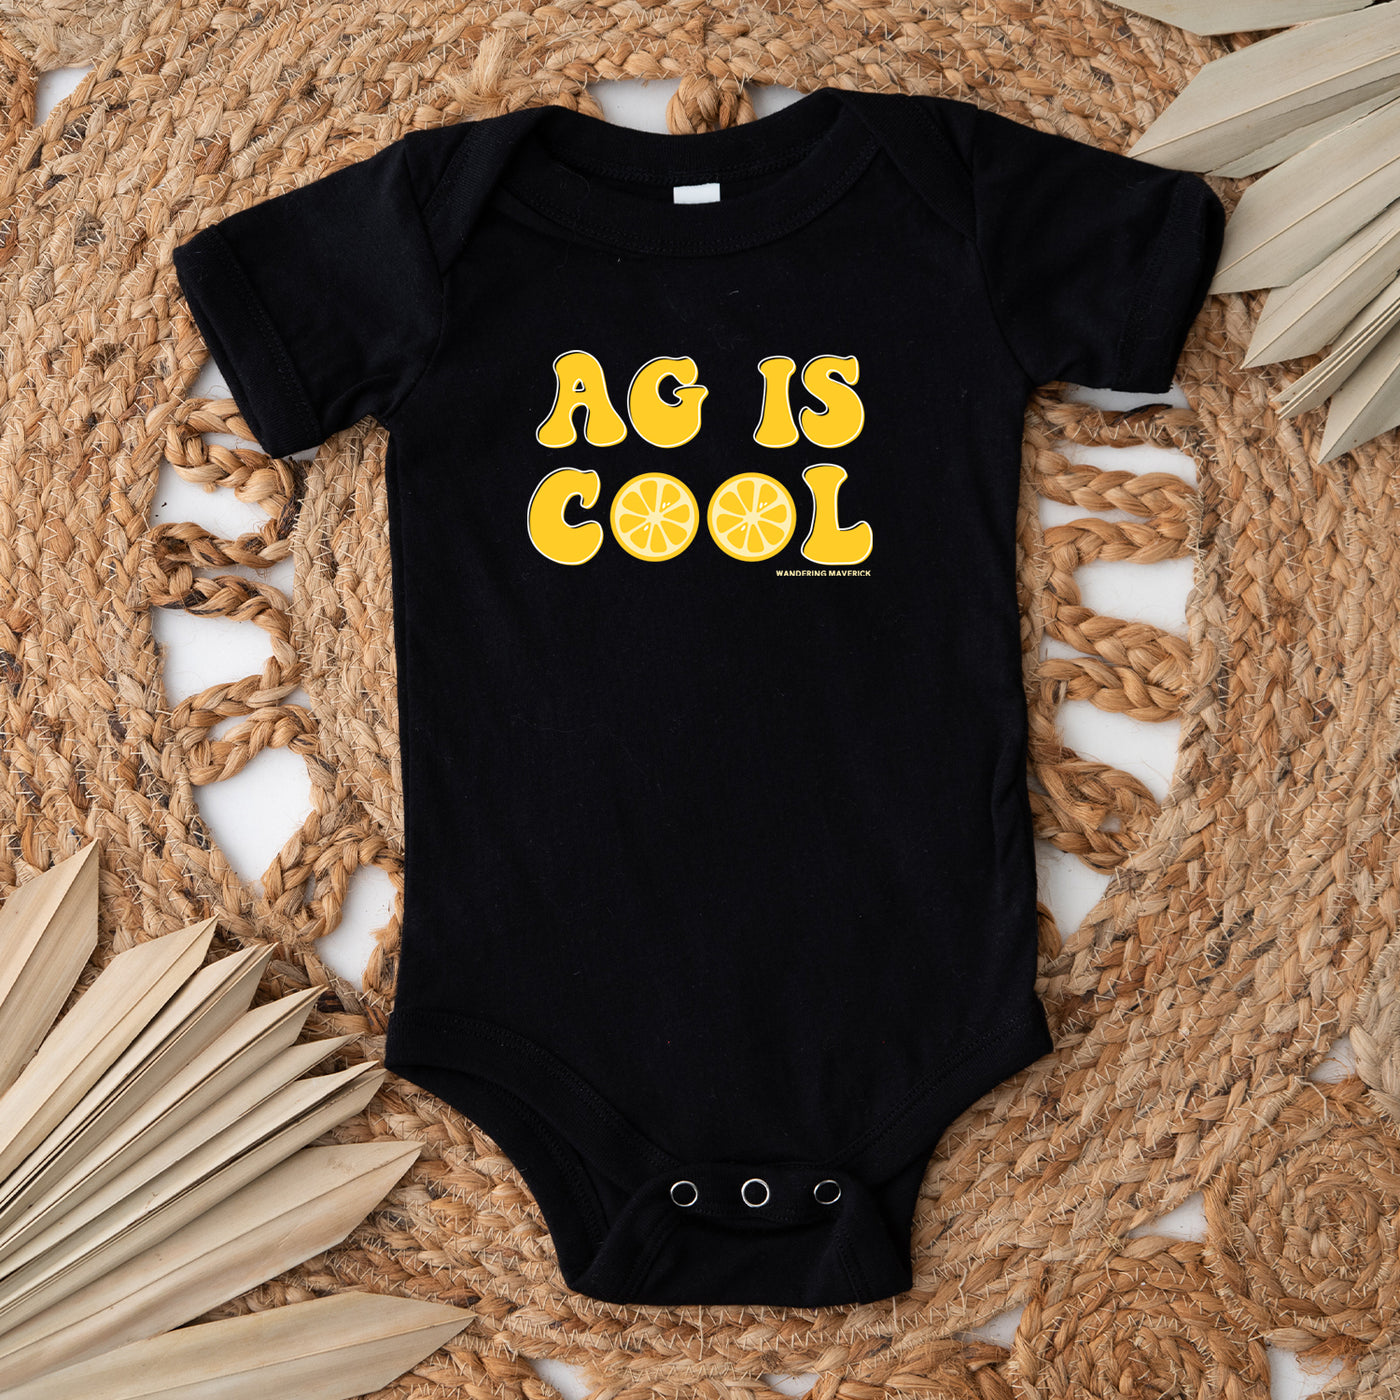 Lemon Support Women In Ag One Piece/T-Shirt (Newborn - Youth XL) - Multiple Colors!